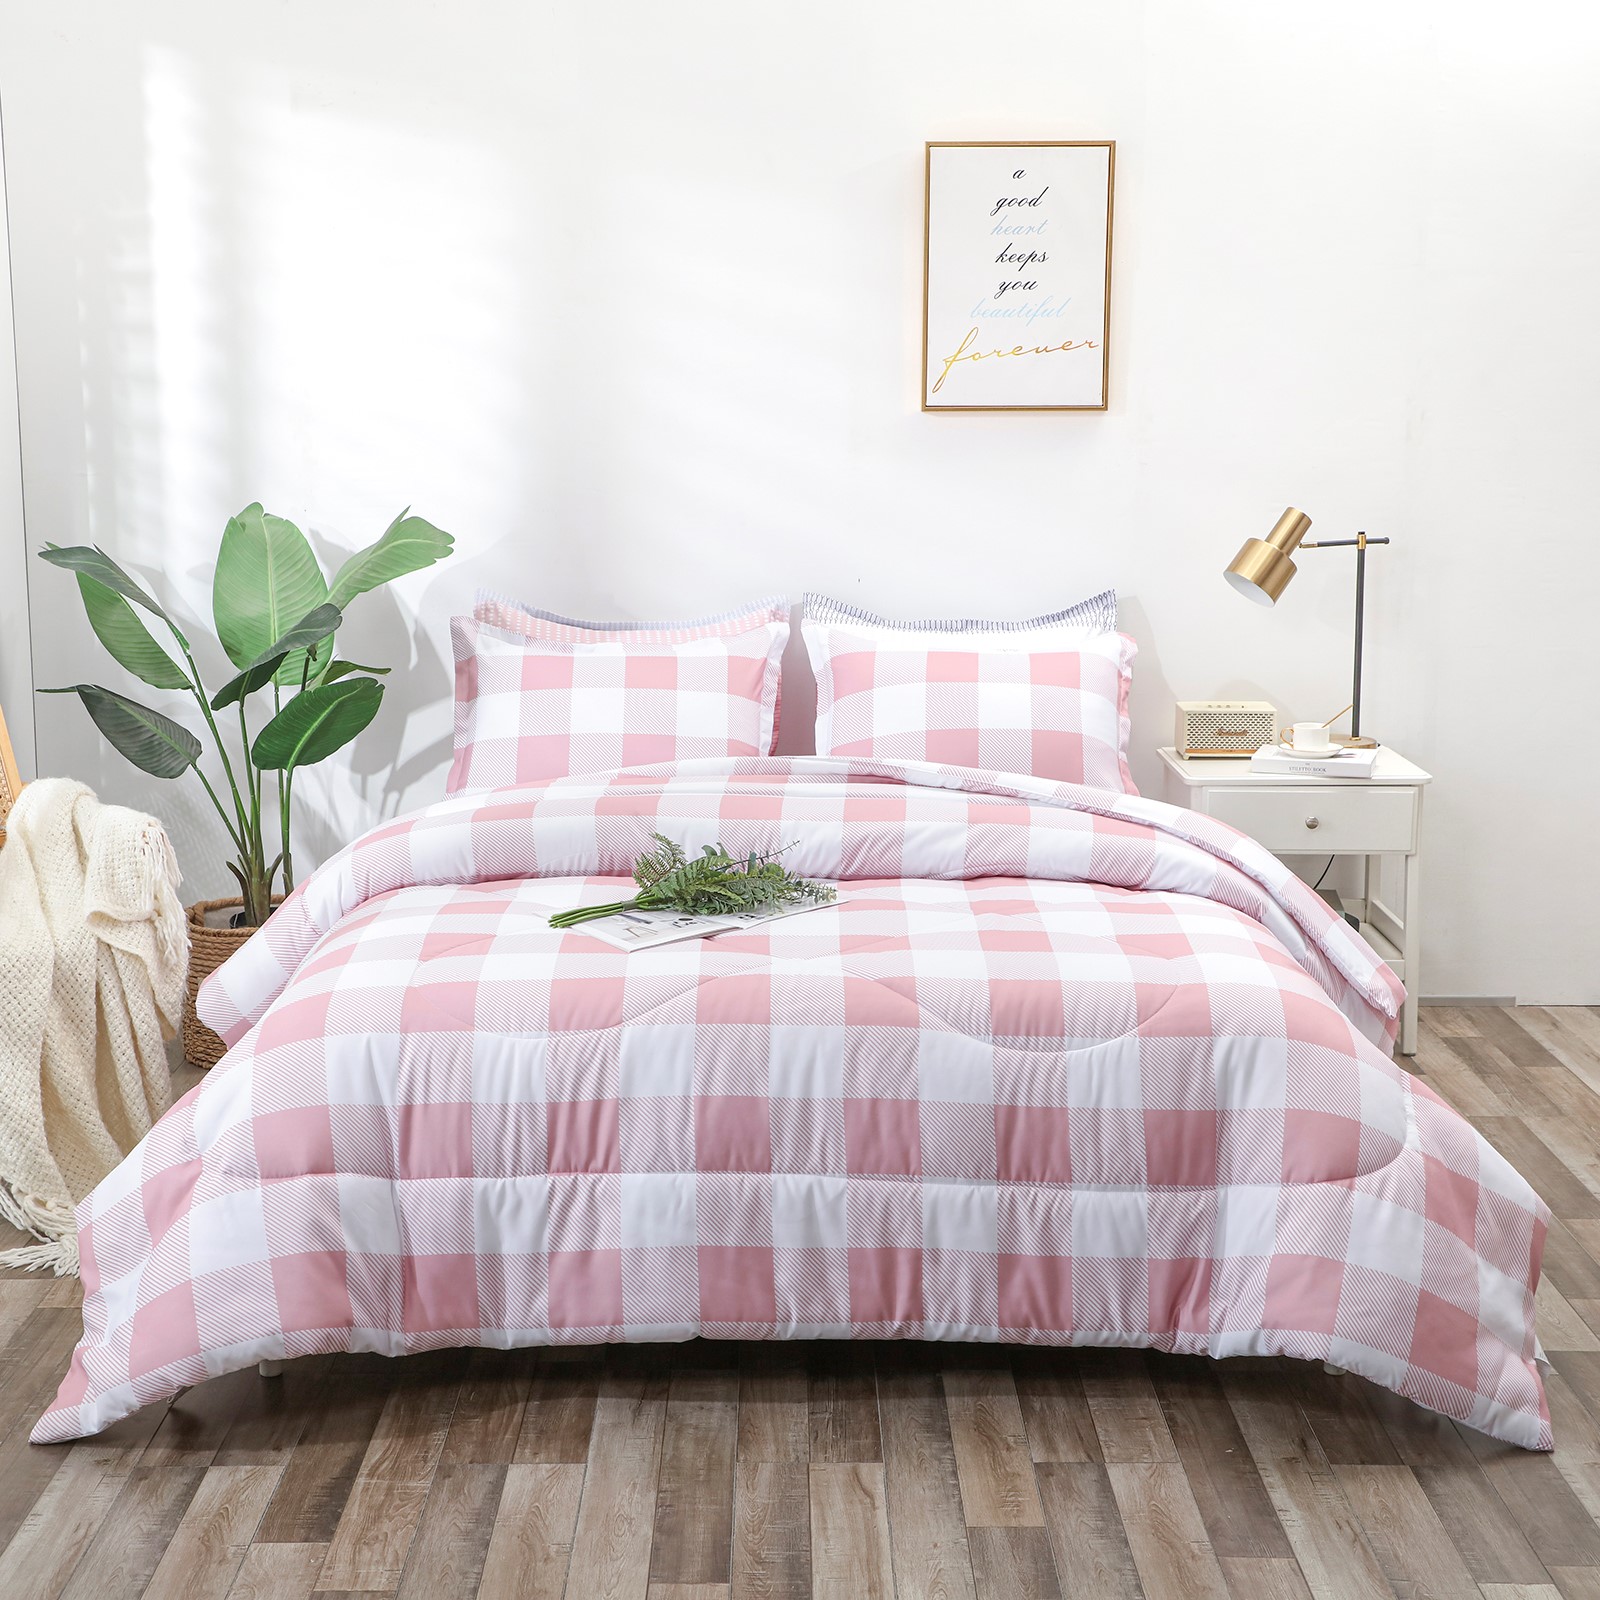 Luckybull Blush White Plaid Comforter Full (79x90Inch), 3 Pieces (1 Plaid Comforter and 2 Pillowcases) Buffalo Check Plaid Comforter Set, Geometric Checkered Comforter Bedding Set Featured Image